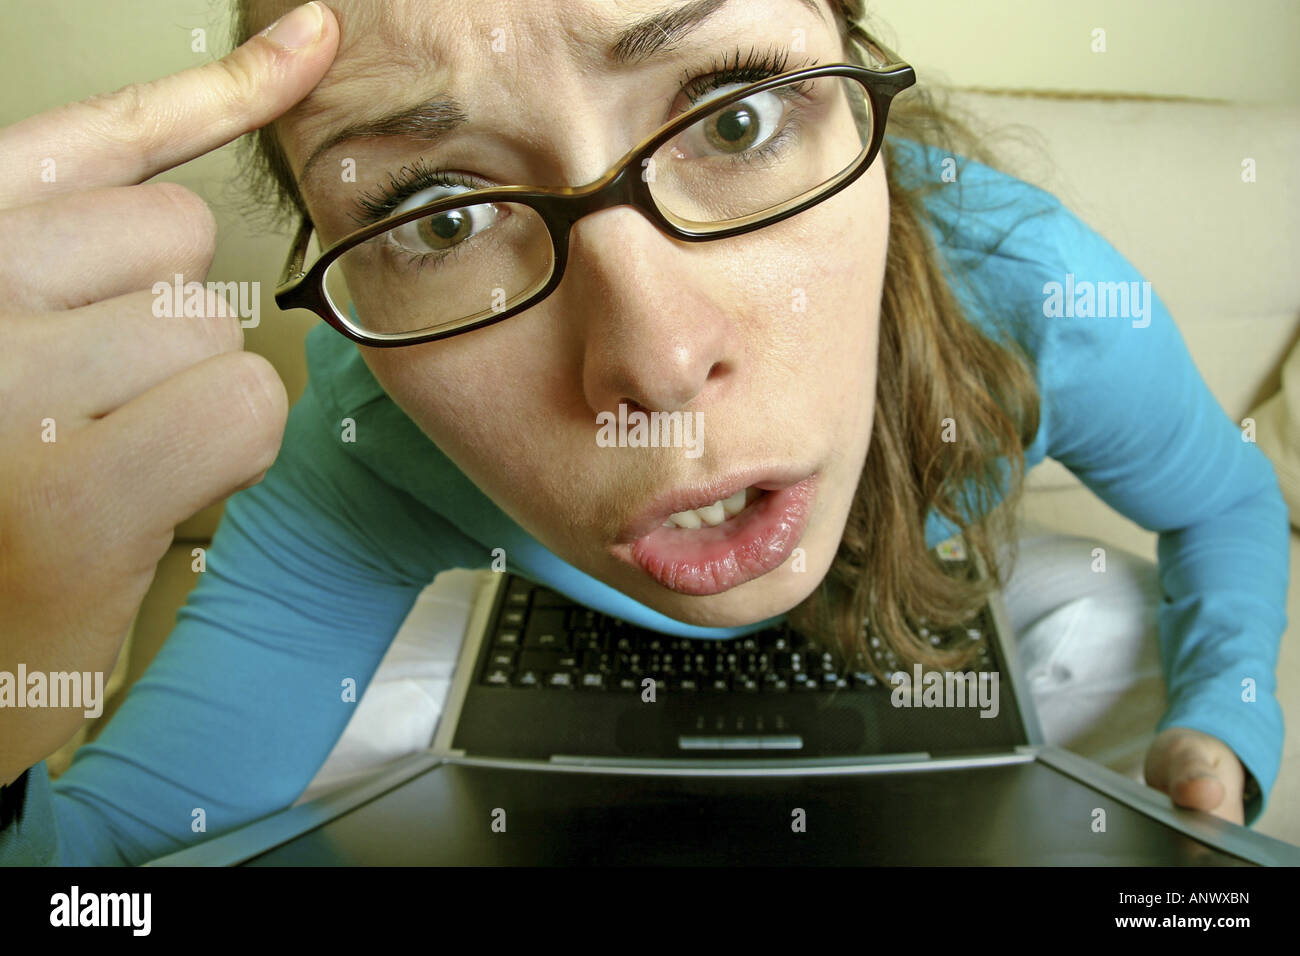 young woman with glasses and notebook give someone the bird Stock Photo